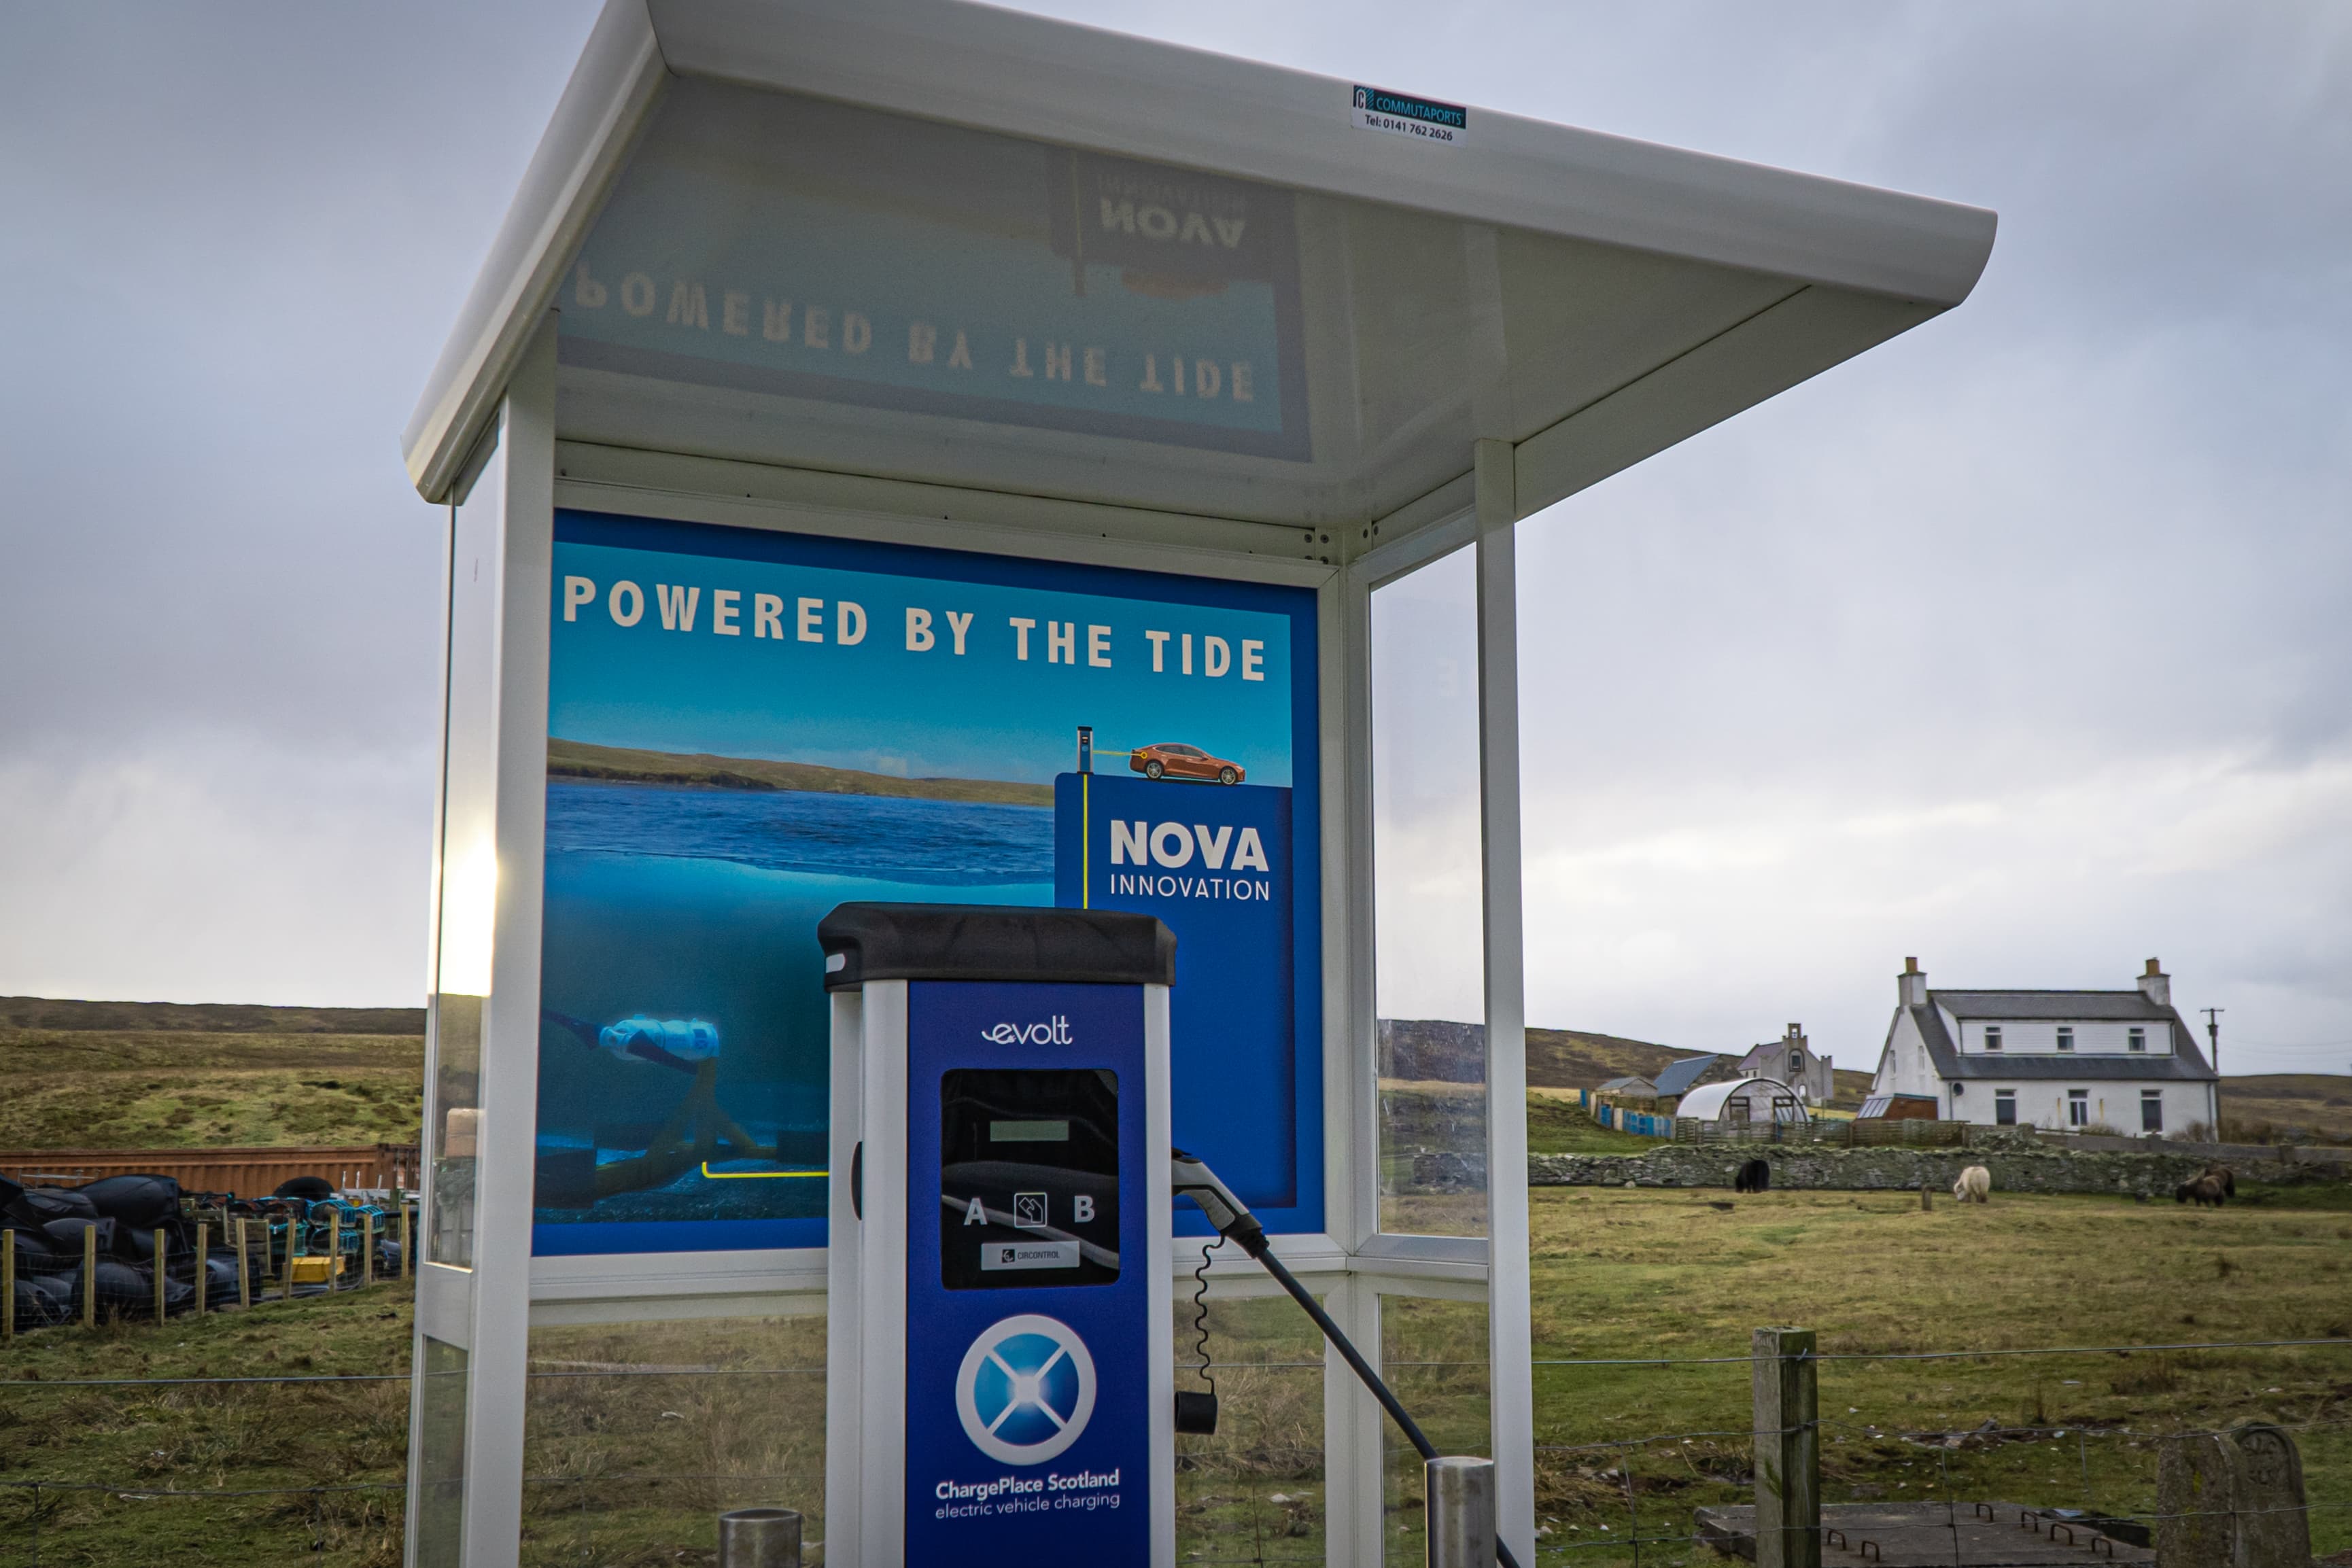 Tidal power is providing power for electric vehicles on an island